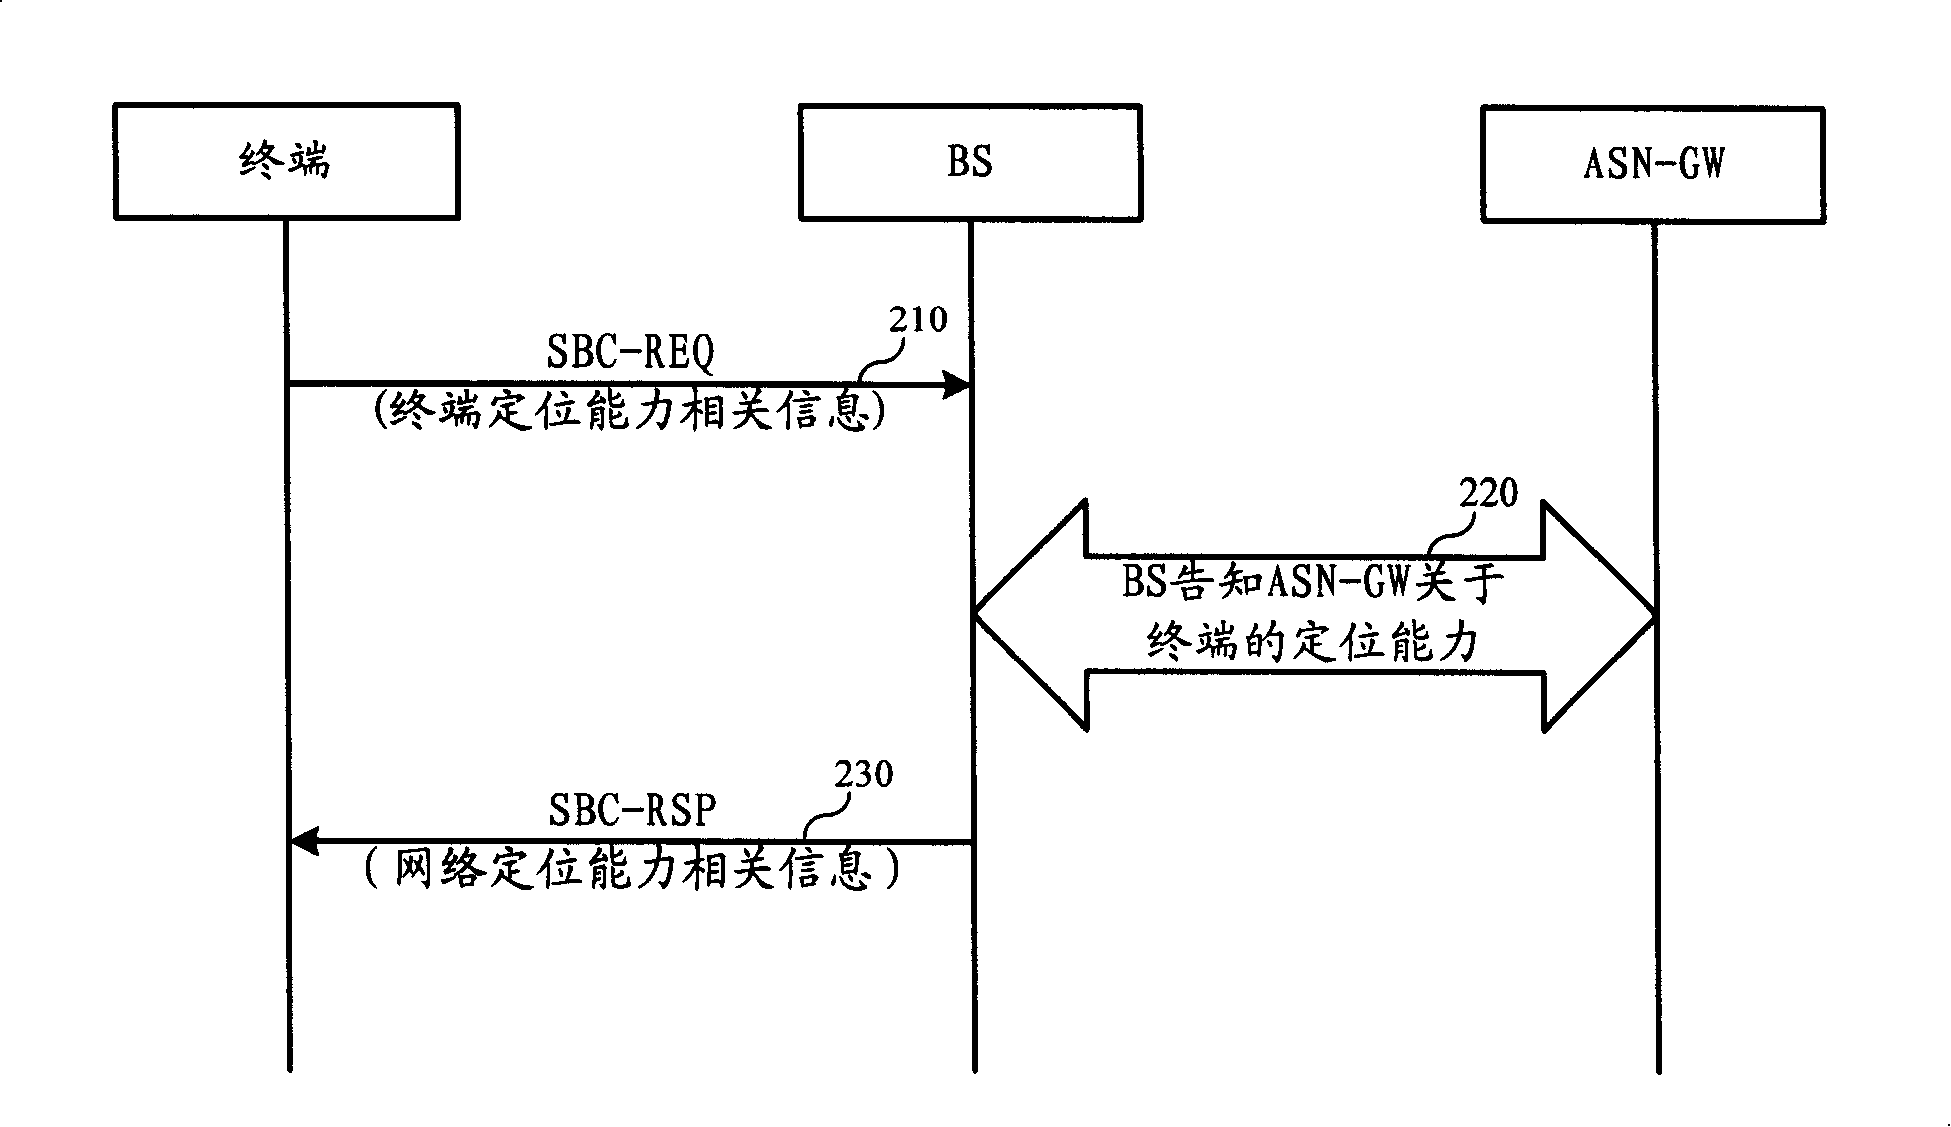 Equipment, system and method for negotiating location capability in microwave access global intercommunication network